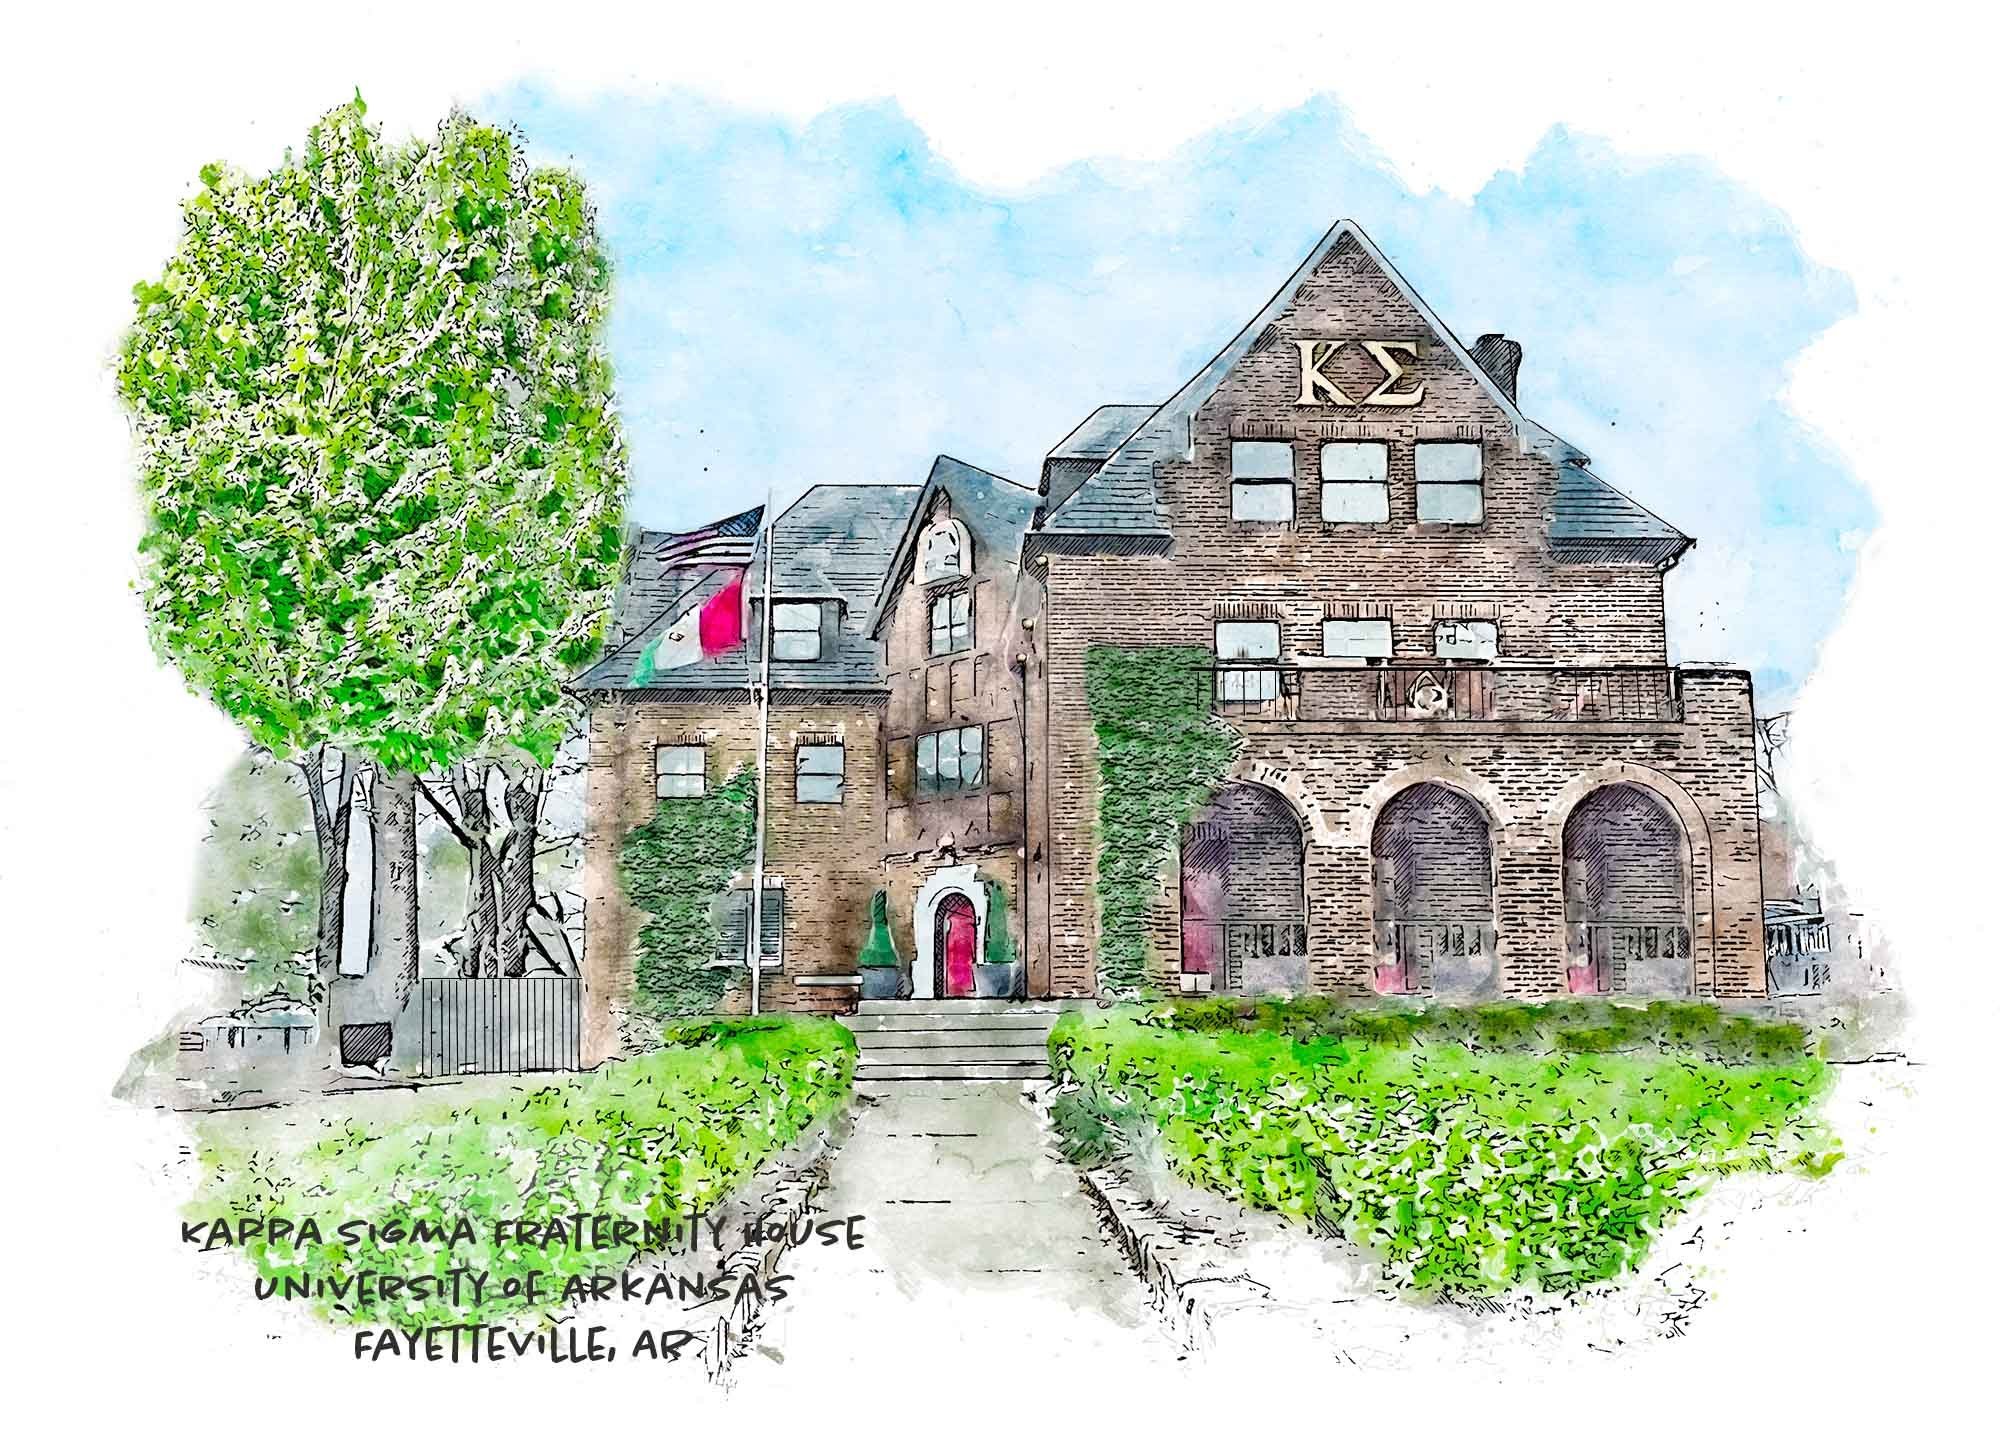 Be sure to check out all the University of Arkansas #Fraternity and #Sorority house prints online and in our stores.  All of these fantastic prints are available as 5&rdquo; x 7&rdquo; Note Cards with coordinating envelopes or 5&rdquo; x 7&rdquo;, 8 